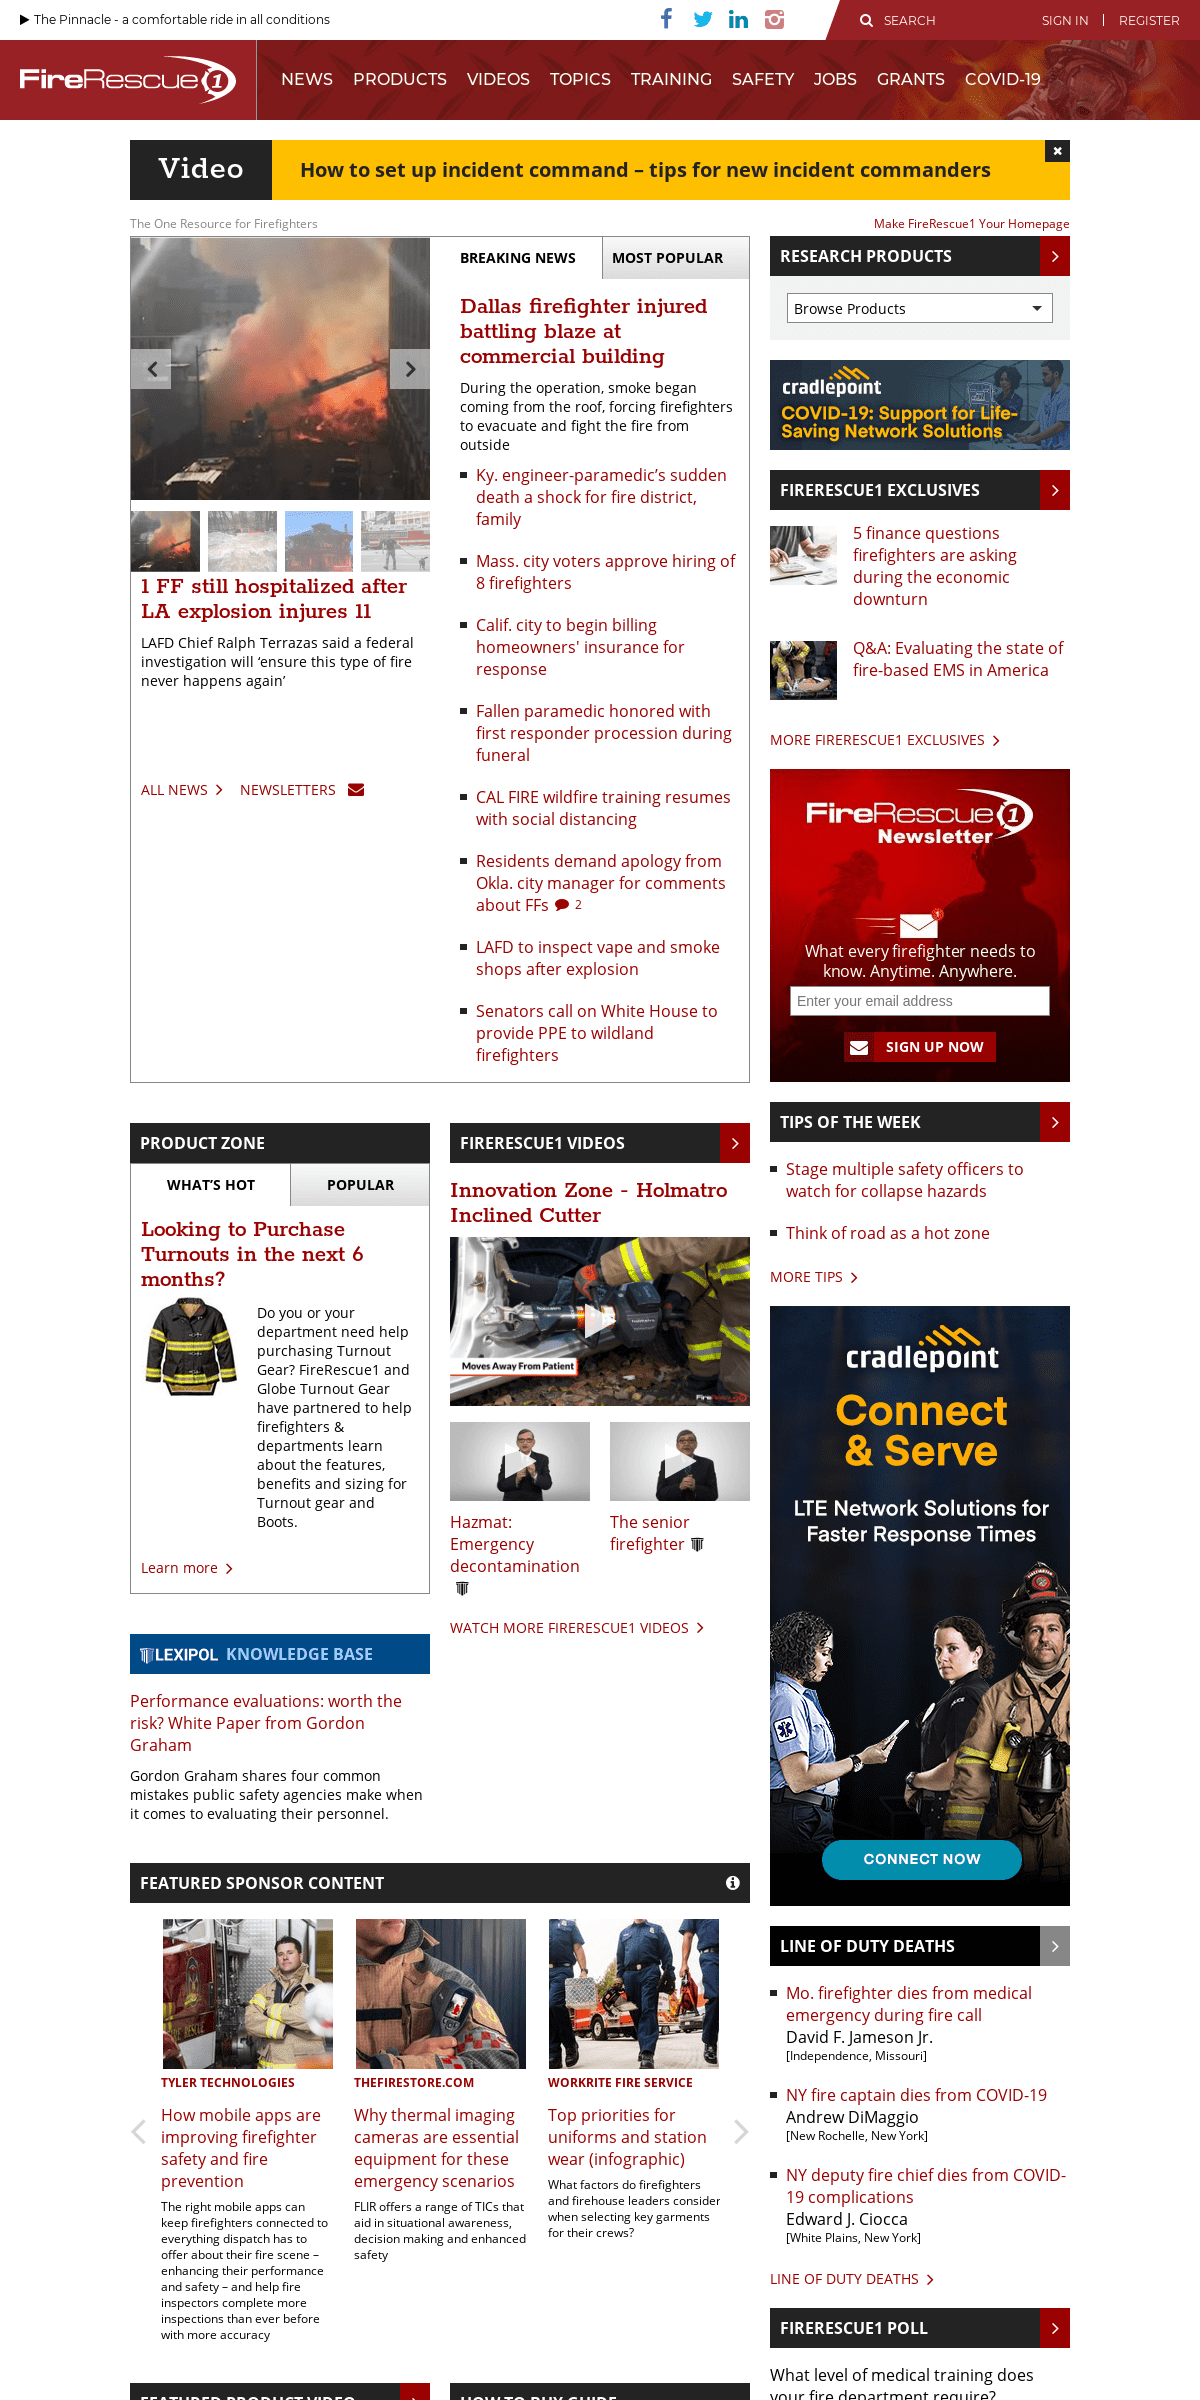 A complete backup of firerescue1.com